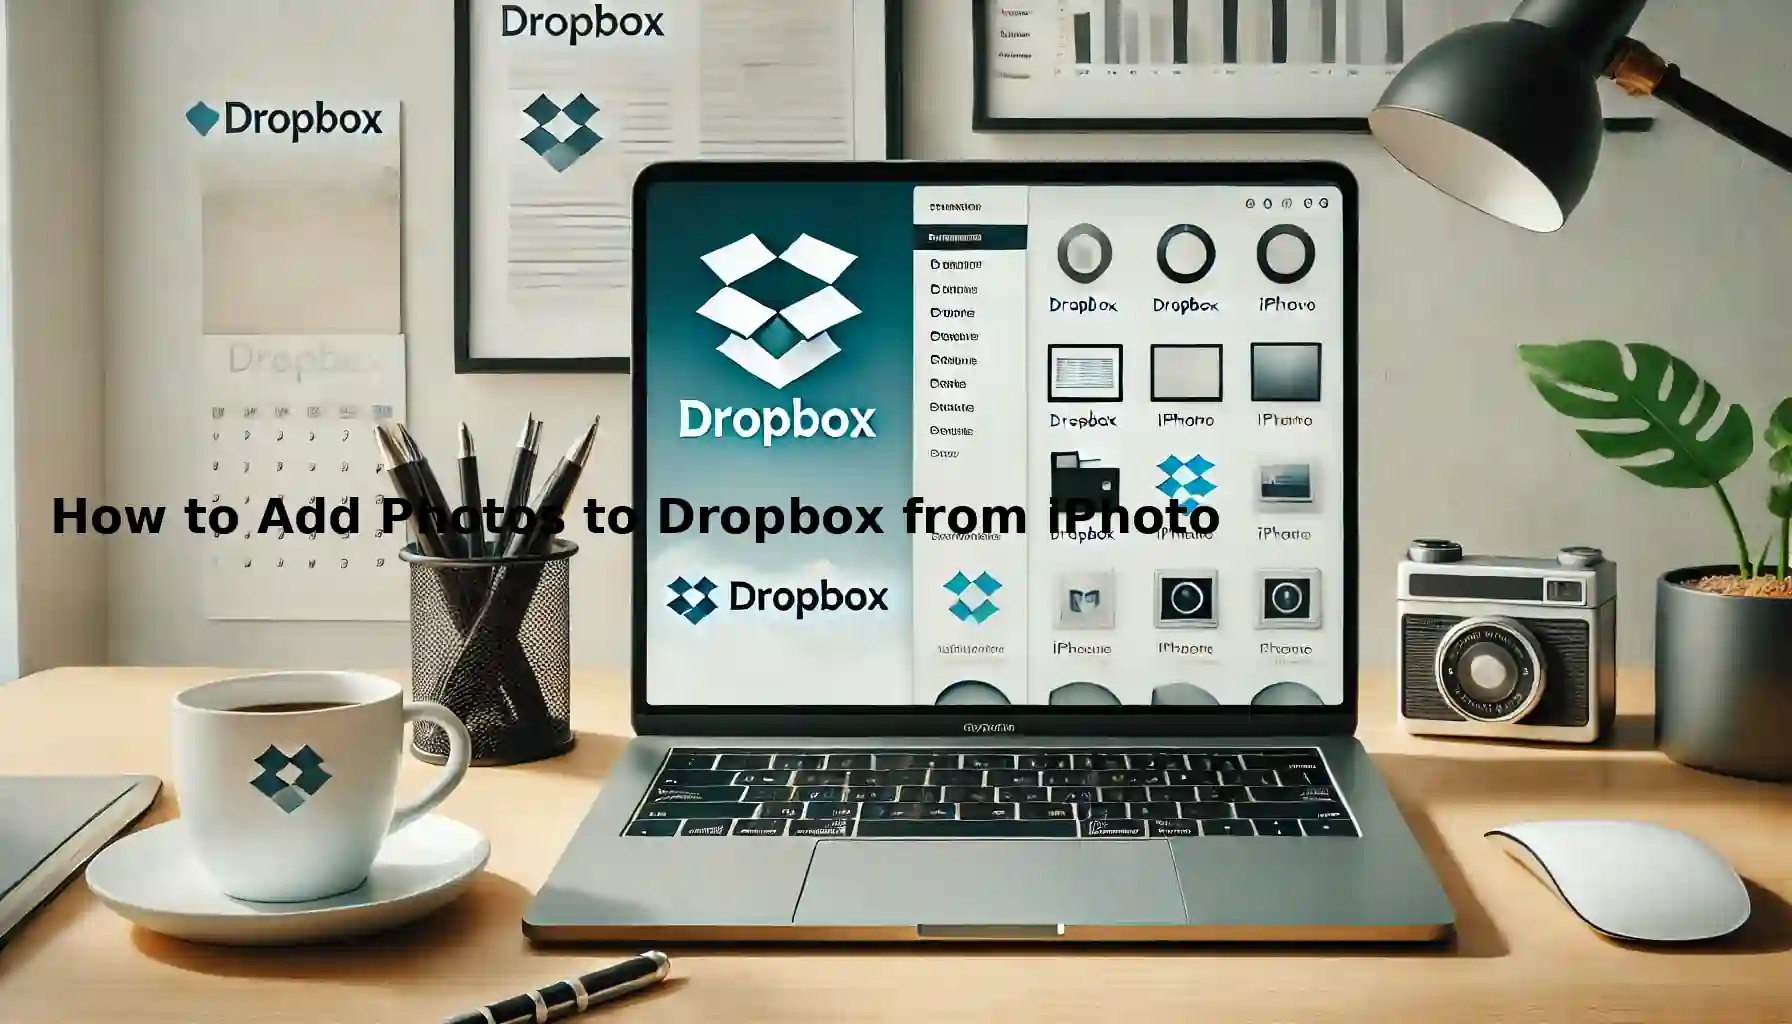 How to Add Photos to Dropbox from iPhoto